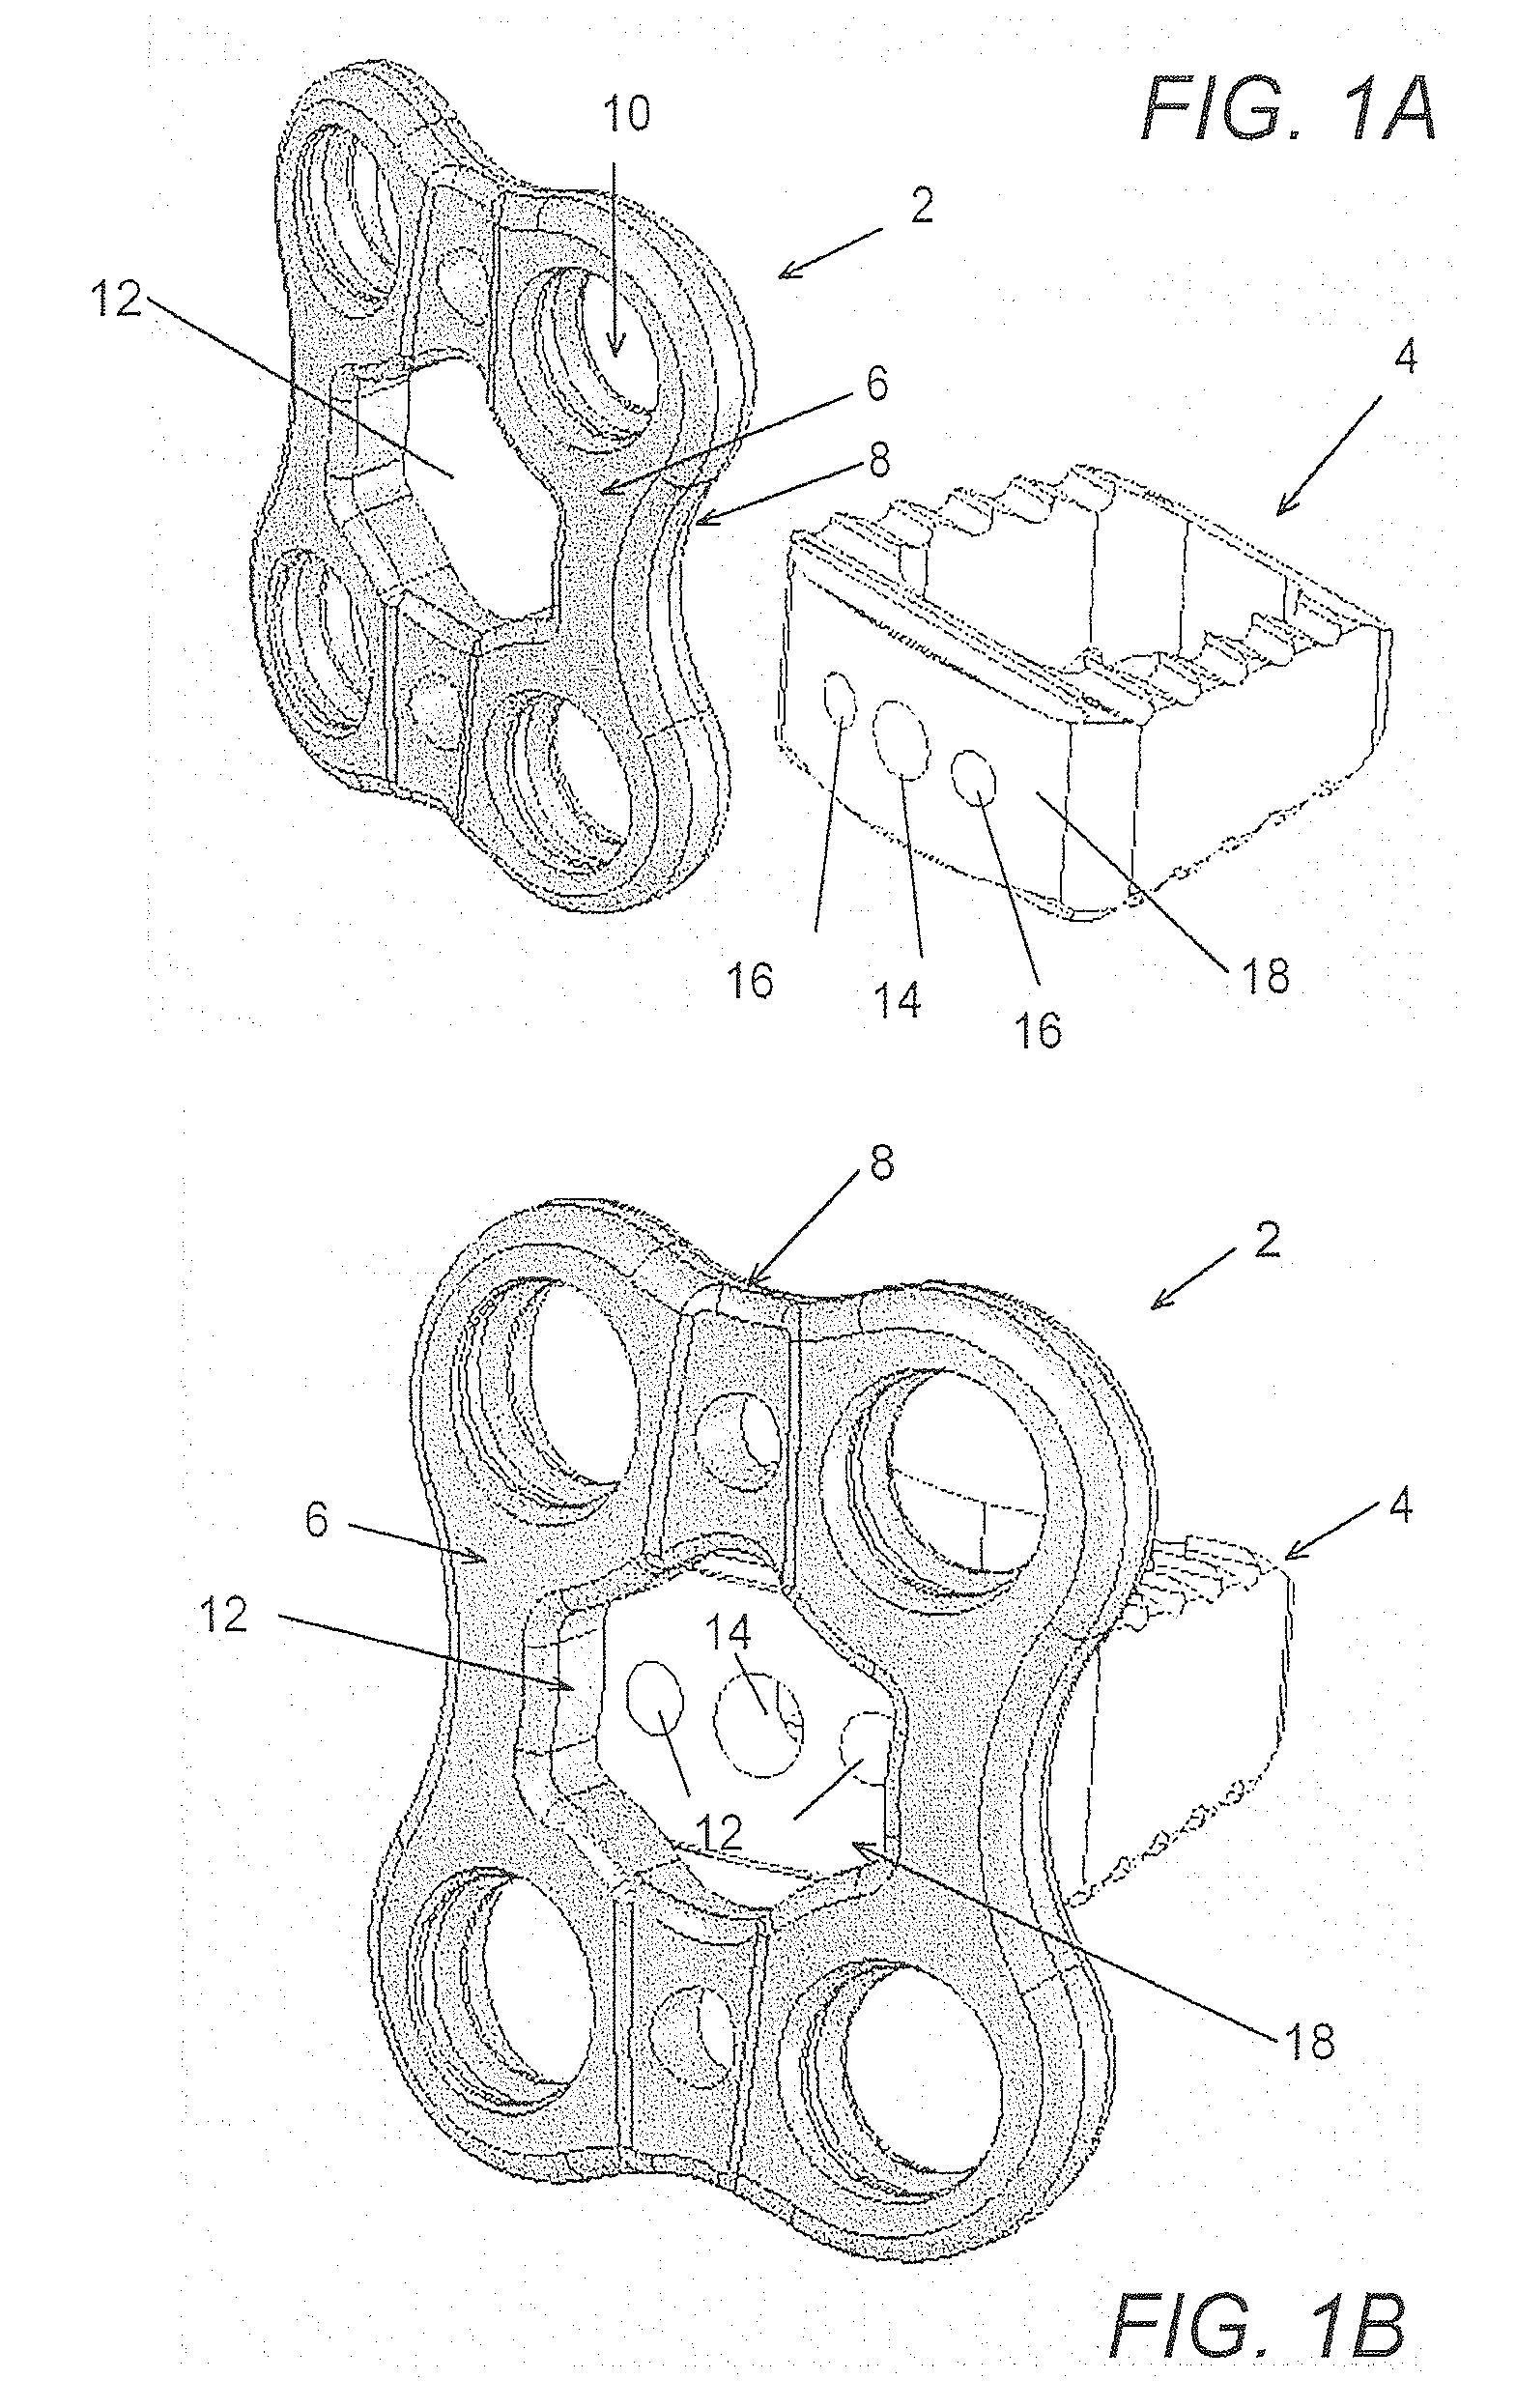 Device and method for delivery of multiple heterogenous orthopedic implants